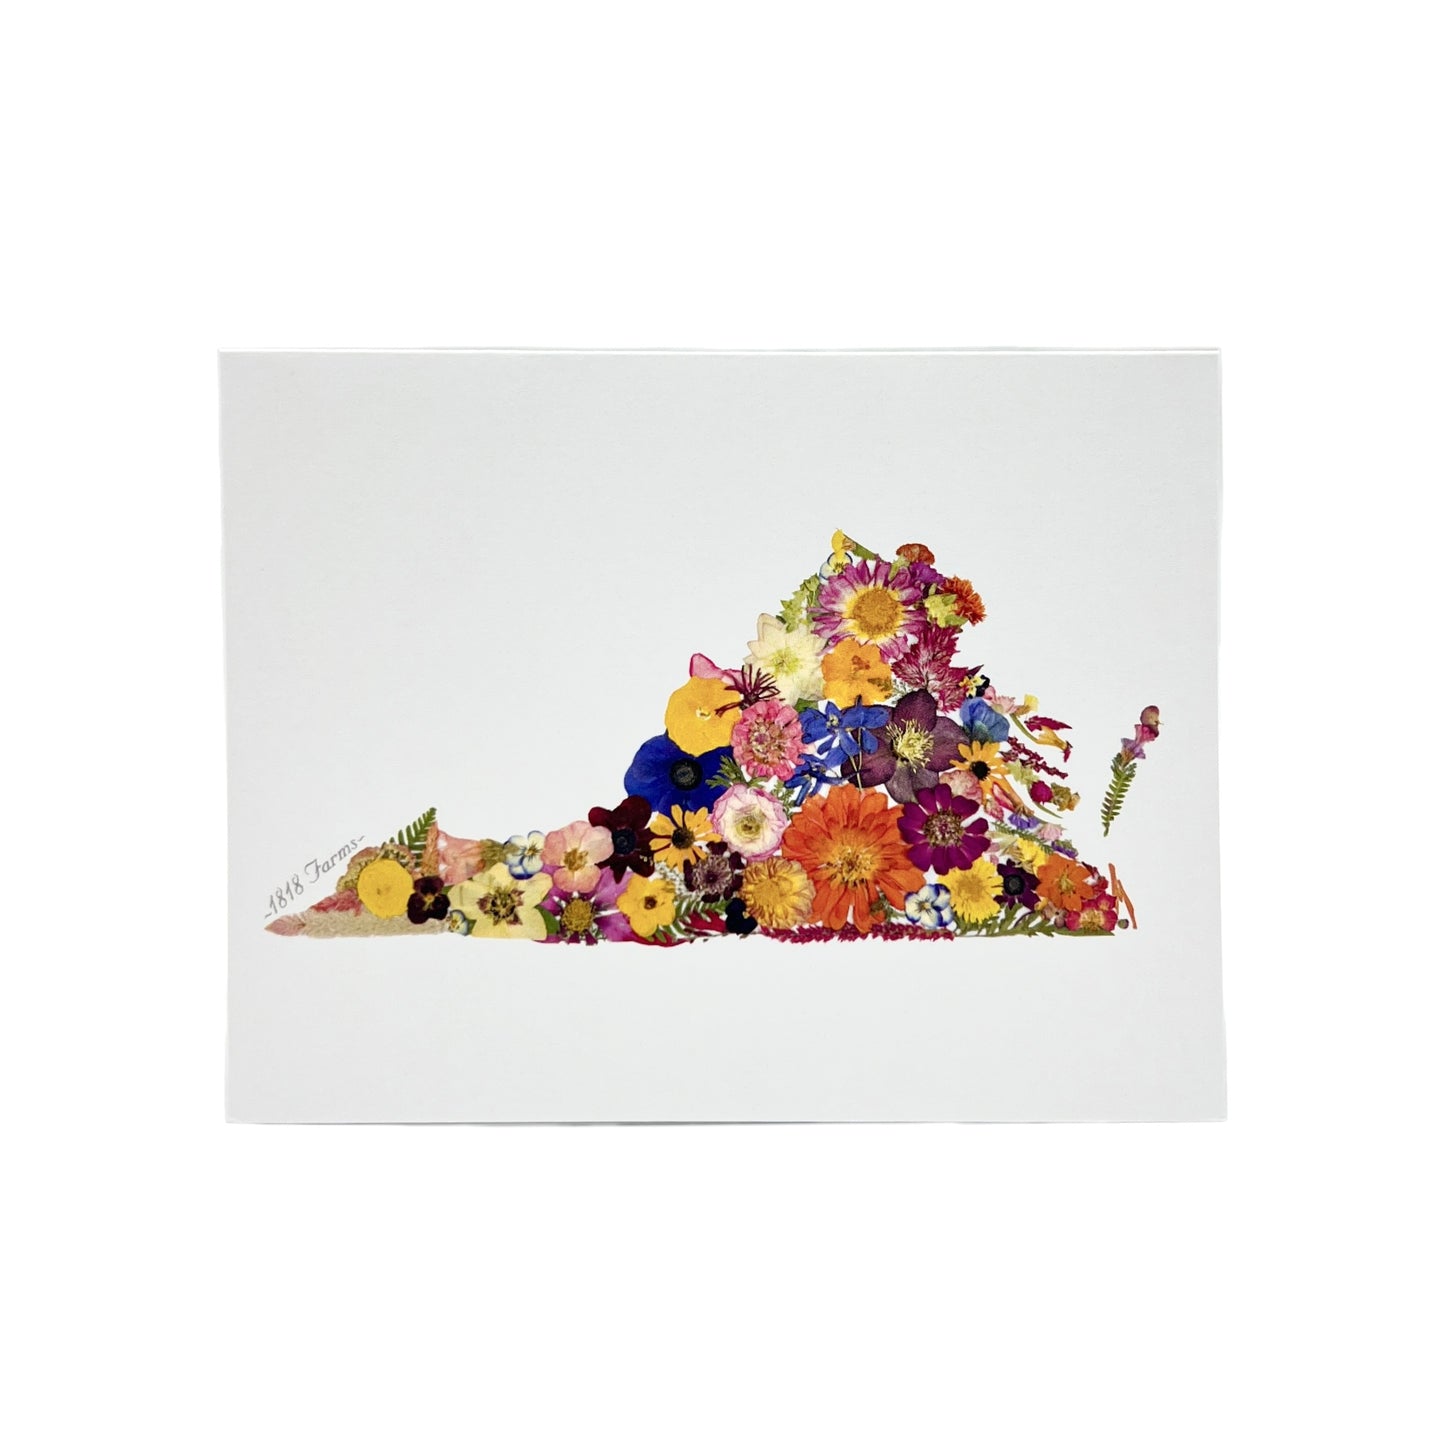 State Themed Notecards (Set of 6) Featuring Dried, Pressed Flowers - "Where I Bloom" Collection